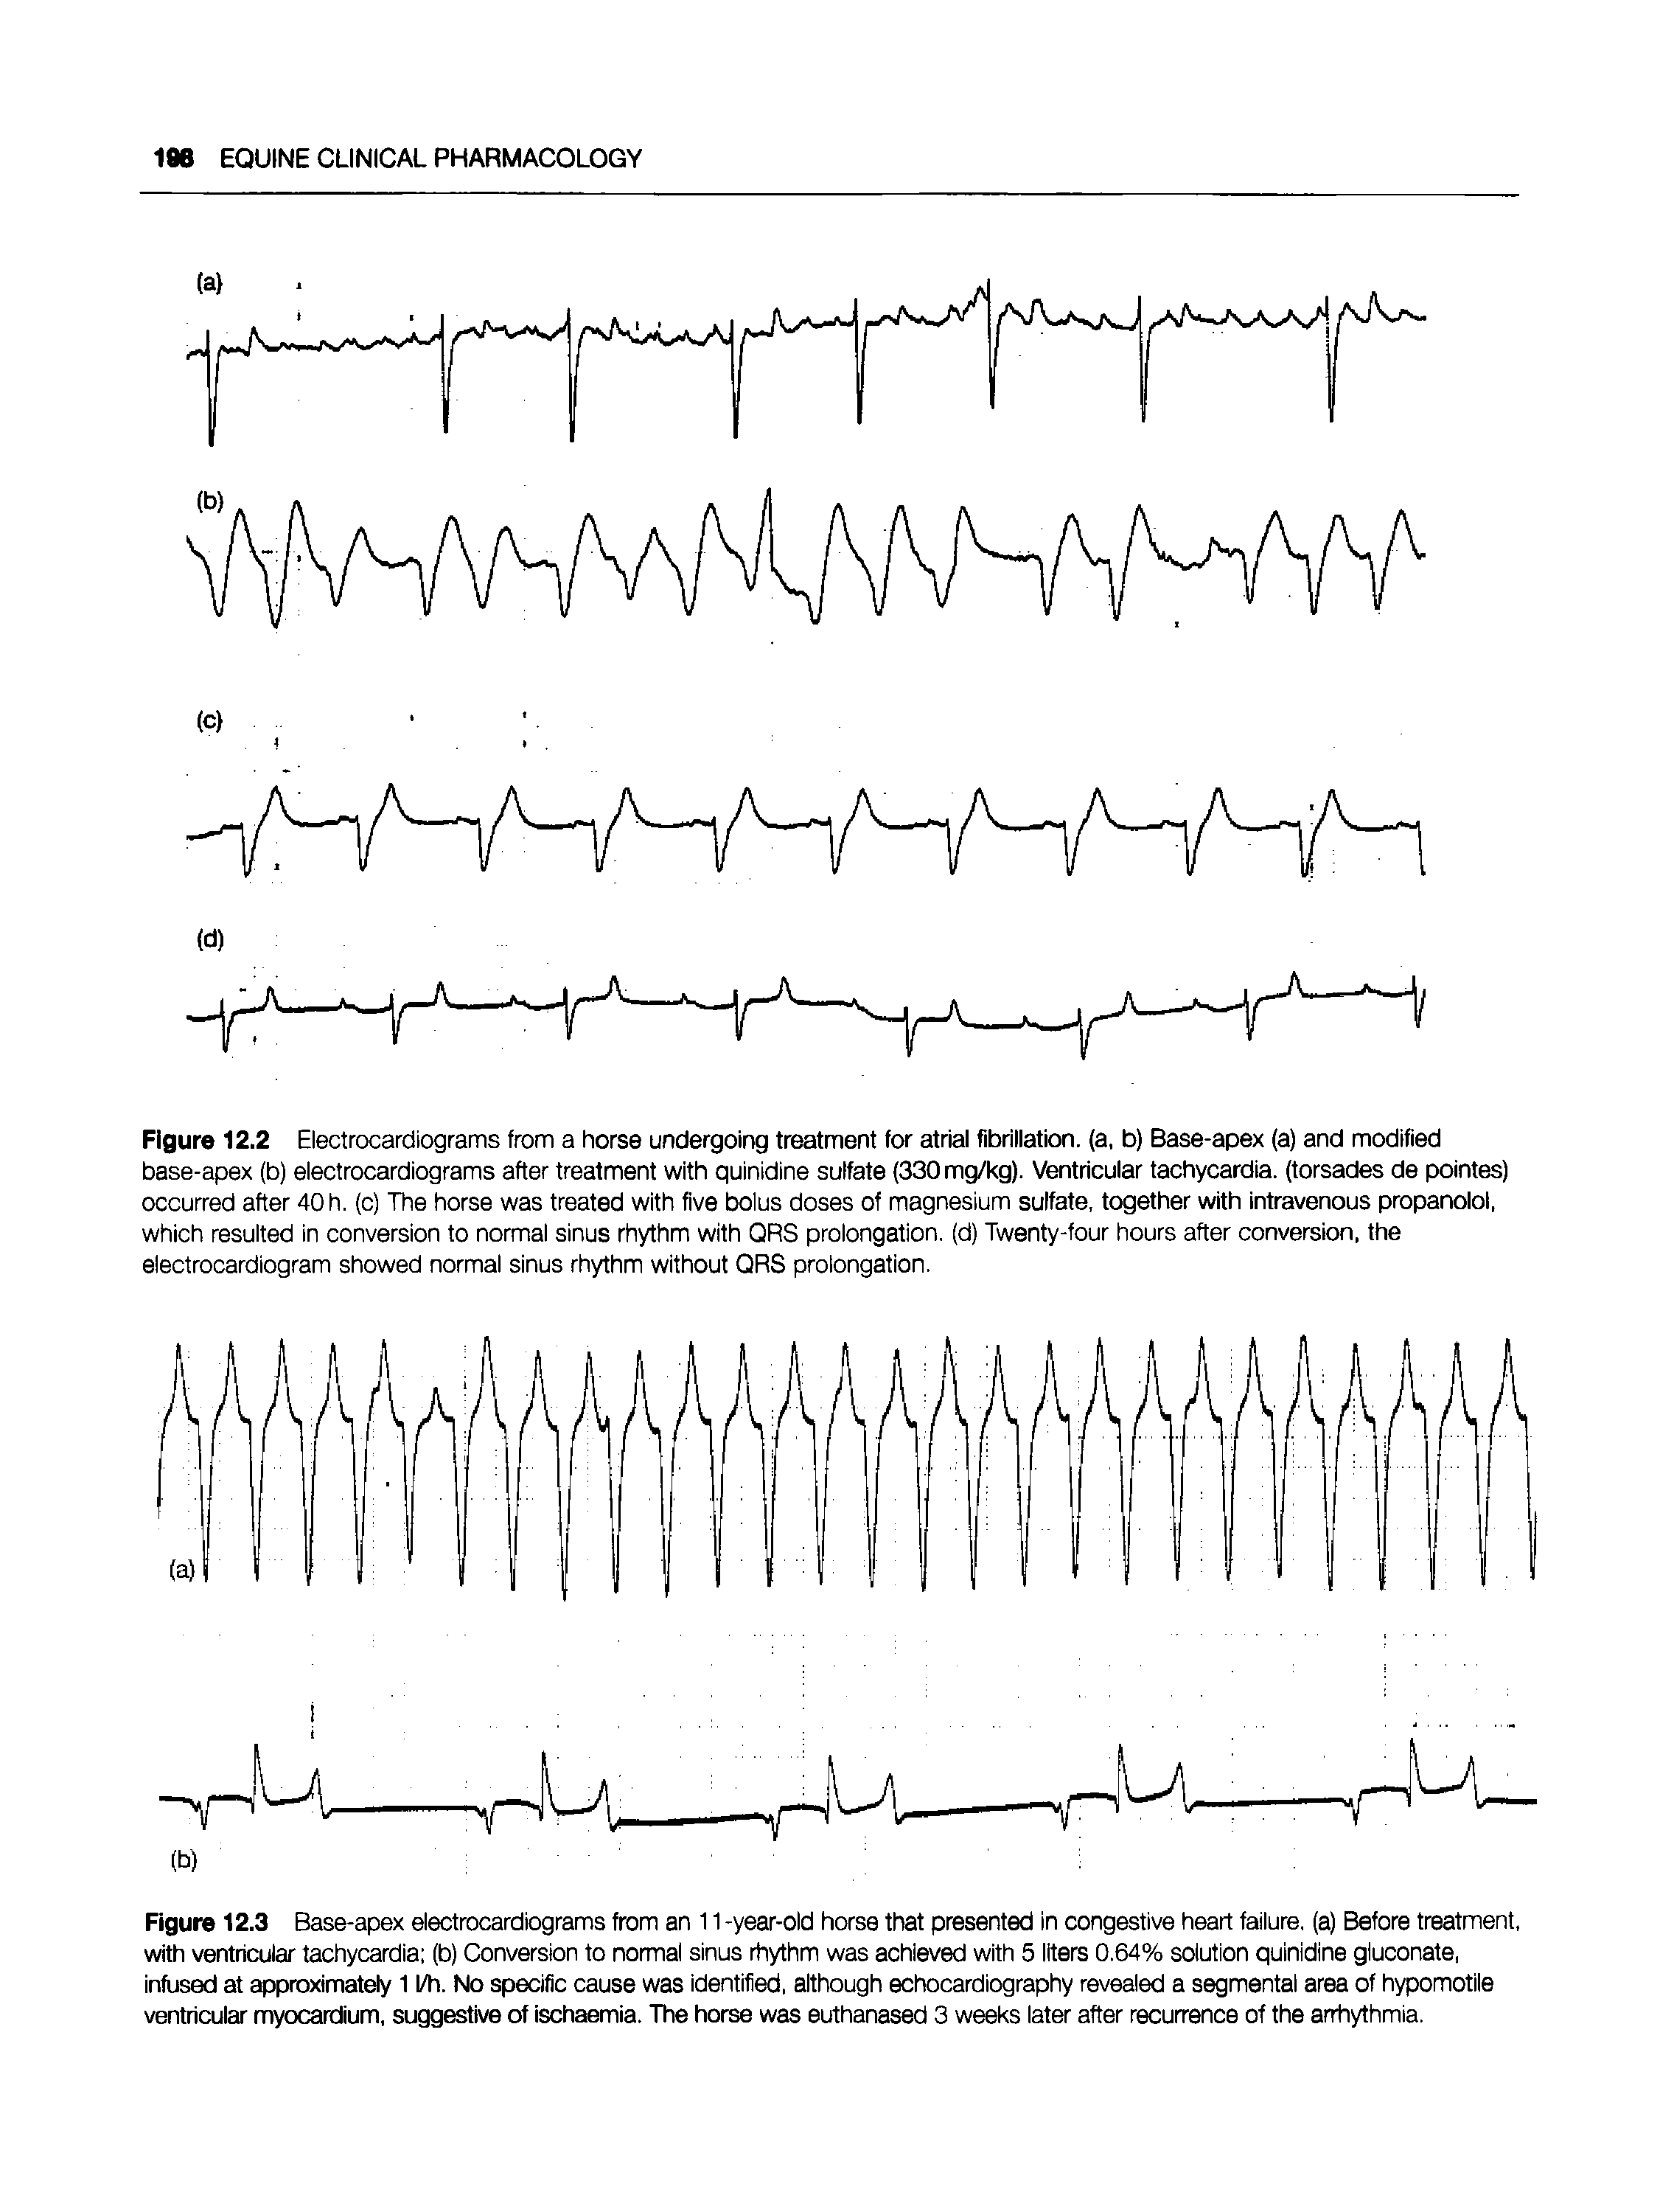 Figure 12.3 Base-apex electrocardiograms from an 11 -year-old horse that presented in congestive heart failure, (a) Before treatment, with ventricular tachycardia (b) Conversion to normal sinus rhythm was achieved with 5 liters 0.64% solution quinidine giuconate, infused at approximately 1 l/h. No specific cause was identified, although echocardiography revealed a segmental area of hypomotile ventricular myocardium, suggestive of ischaemia. The horse was euthanased 3 weeks later after recurrence of the arrhythmia.